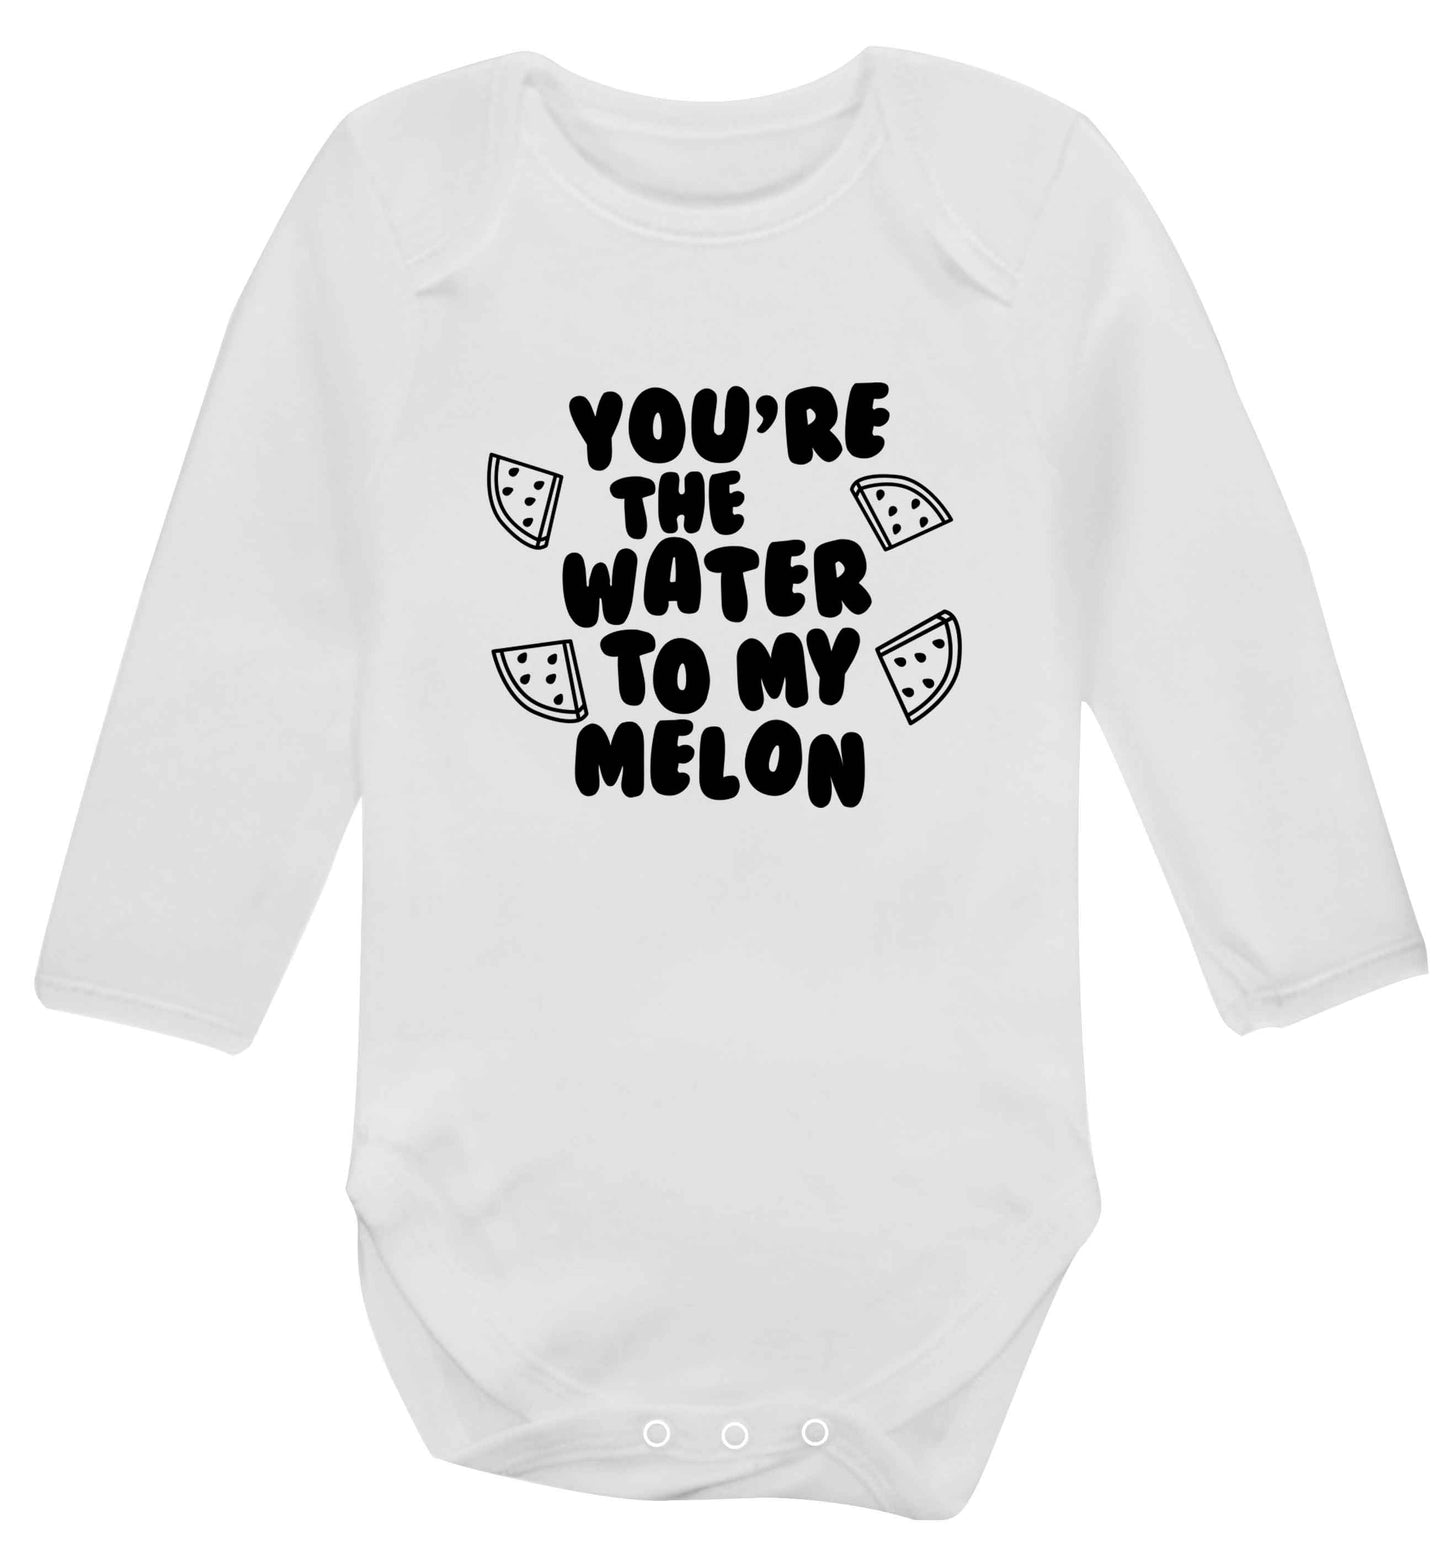 You're the water to my melon baby vest long sleeved white 6-12 months